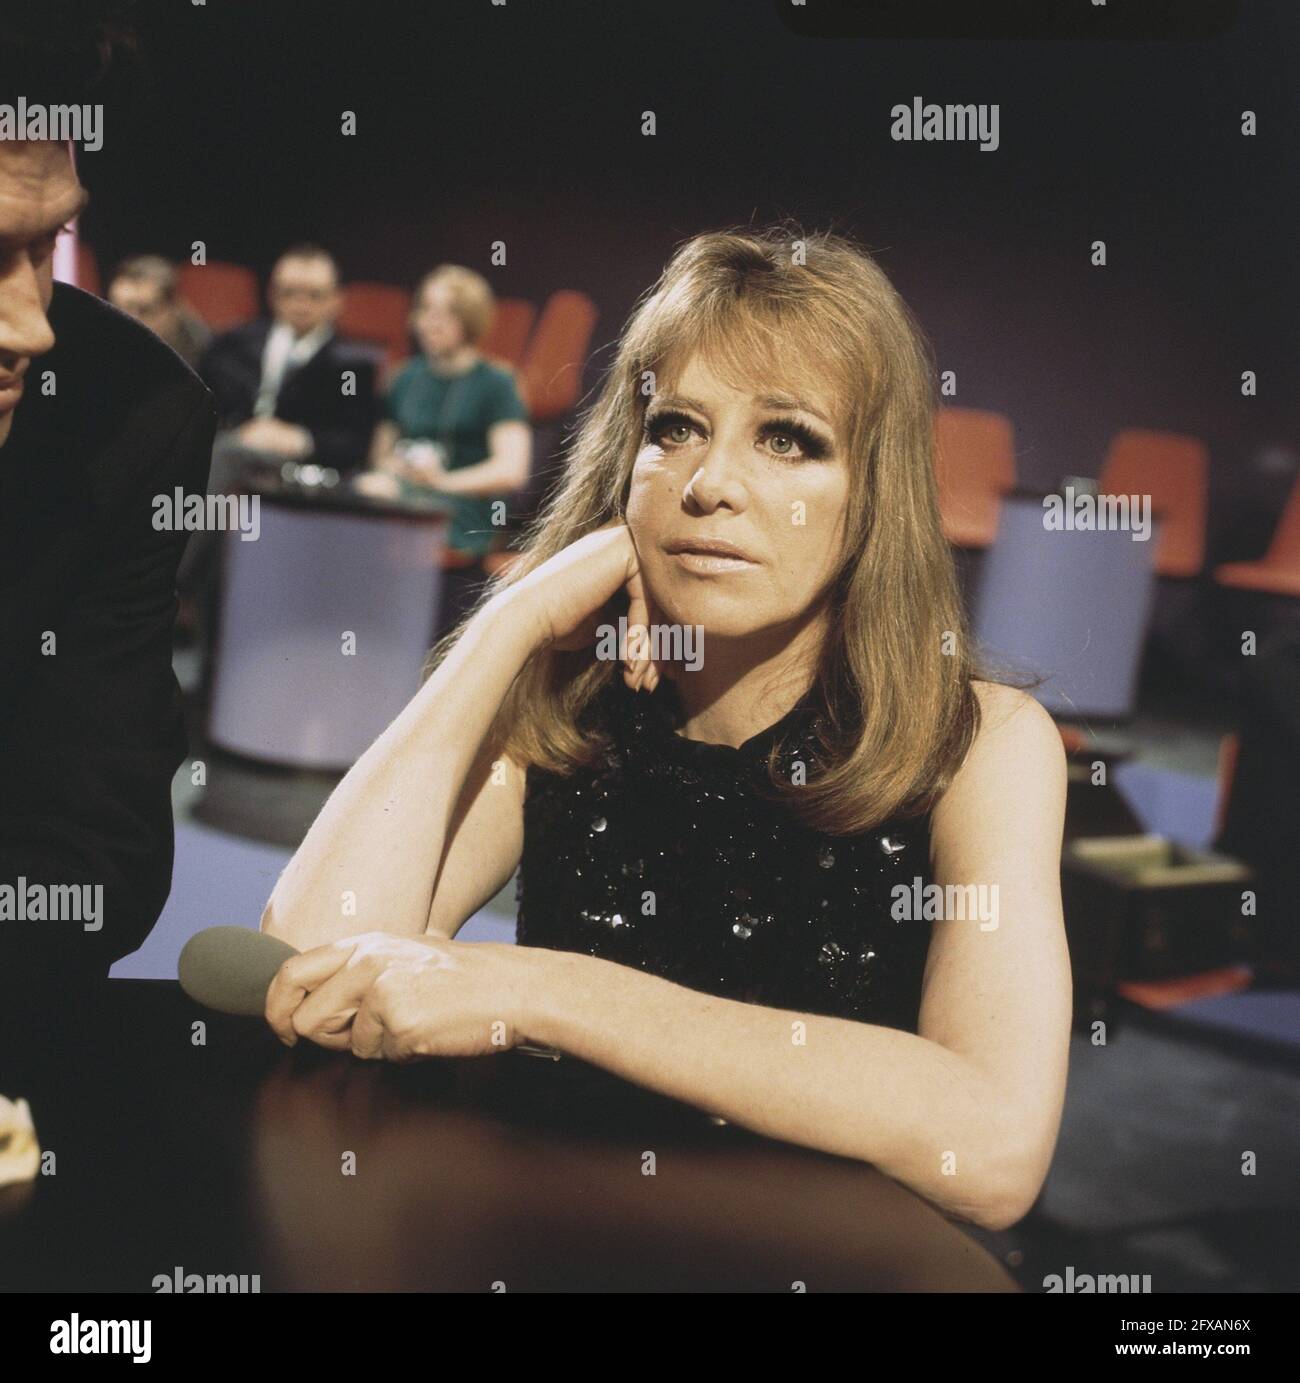 German singer Hildegard Knef makes TV recordings, March 14, 1969, singers, The Netherlands, 20th century press agency photo, news to remember, documentary, historic photography 1945-1990, visual stories, human history of the Twentieth Century, capturing moments in time Stock Photo